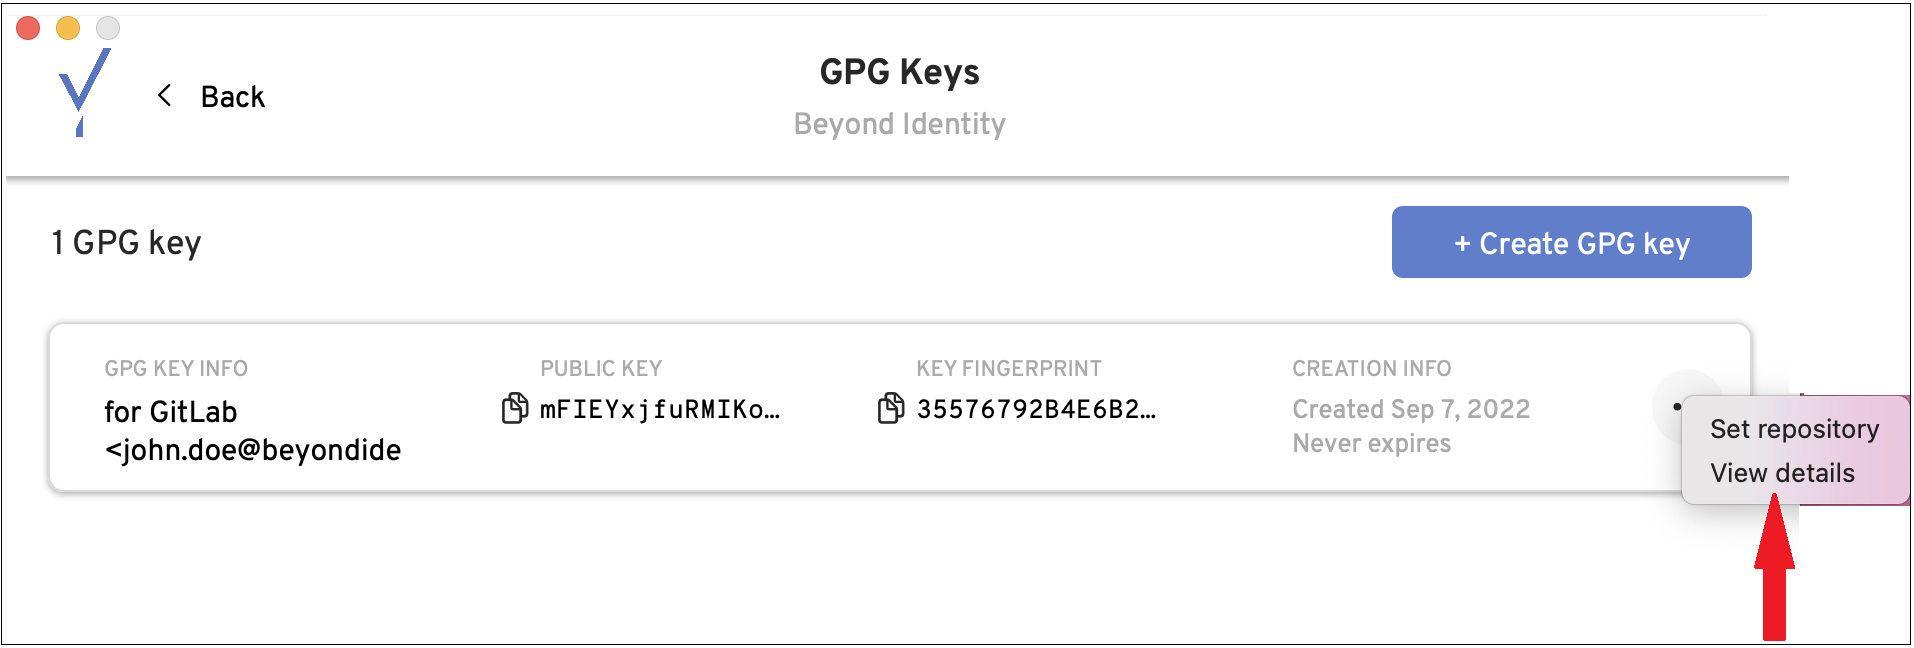 gpg_keys_click_view_details.png